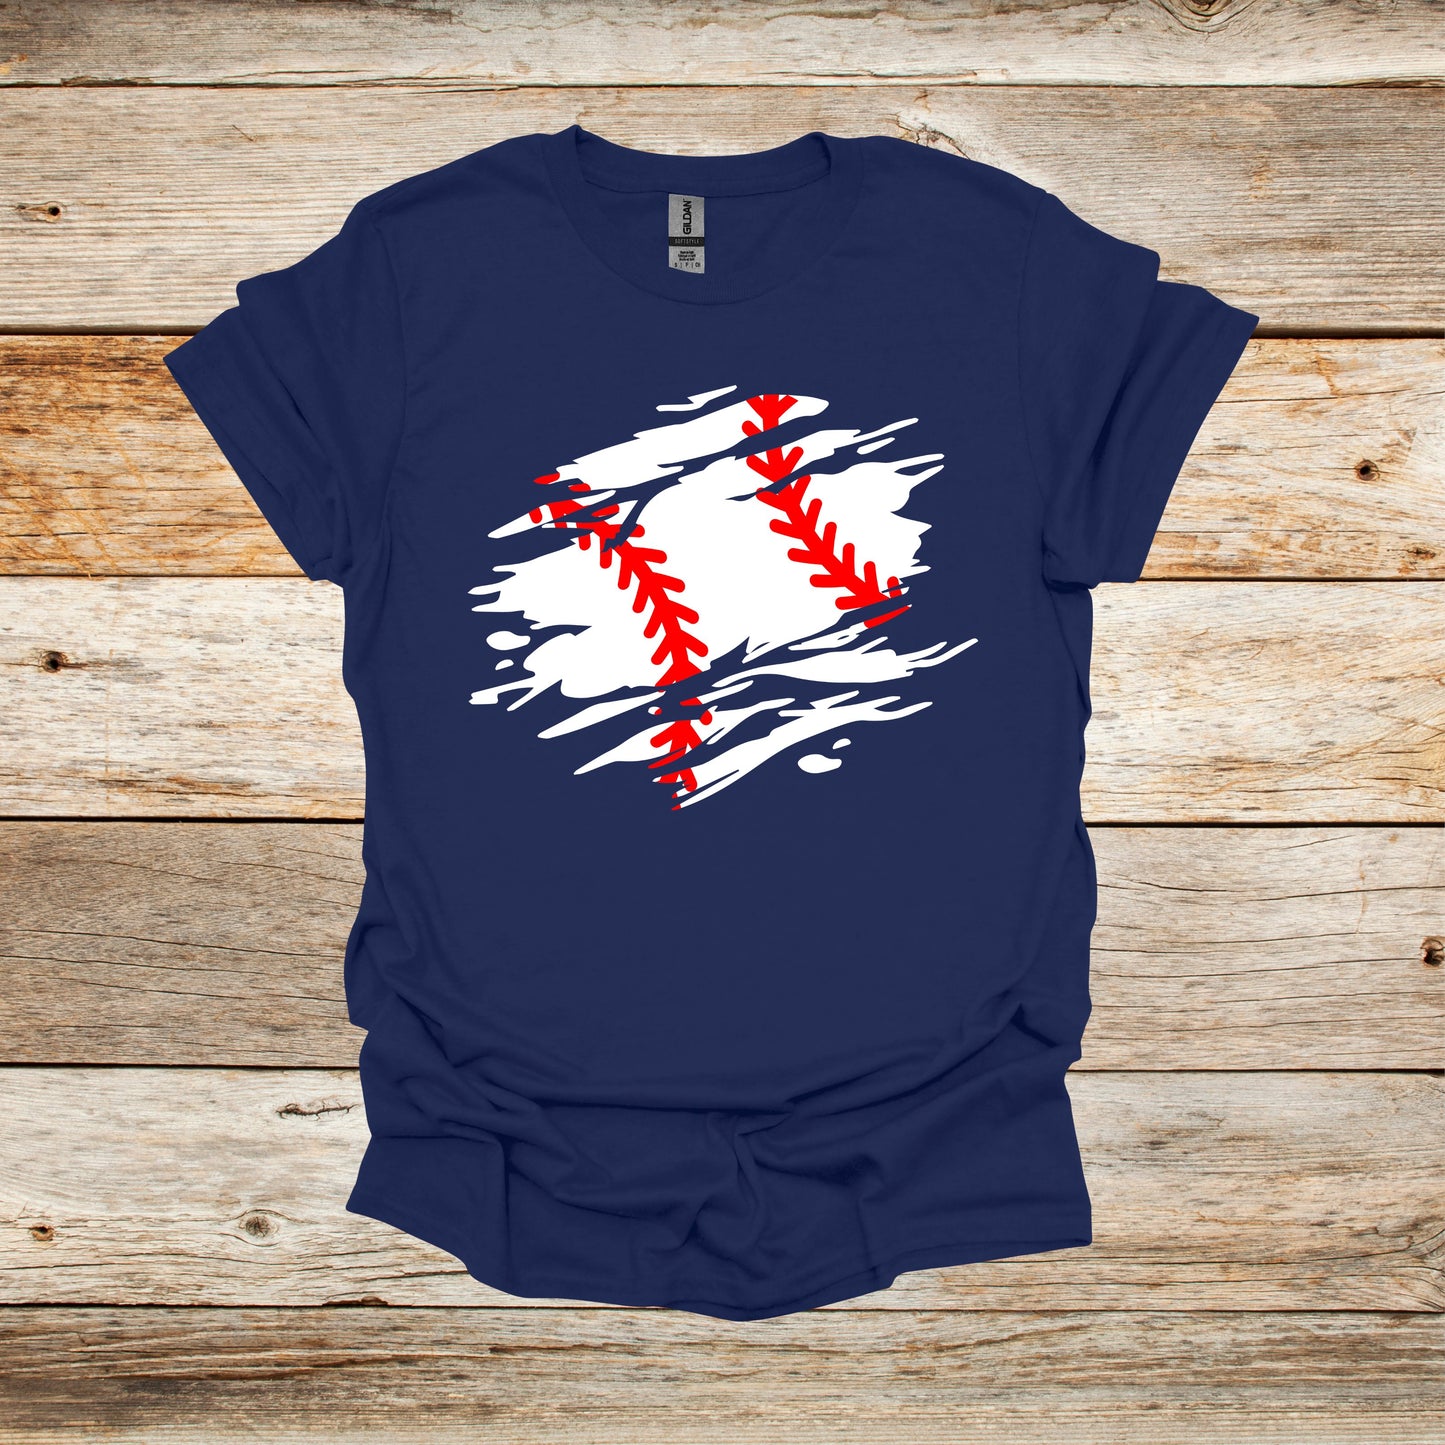 Baseball T-Shirt - Adult and Children's Tee Shirts - Sports T-Shirts Graphic Avenue Navy Adult Small 